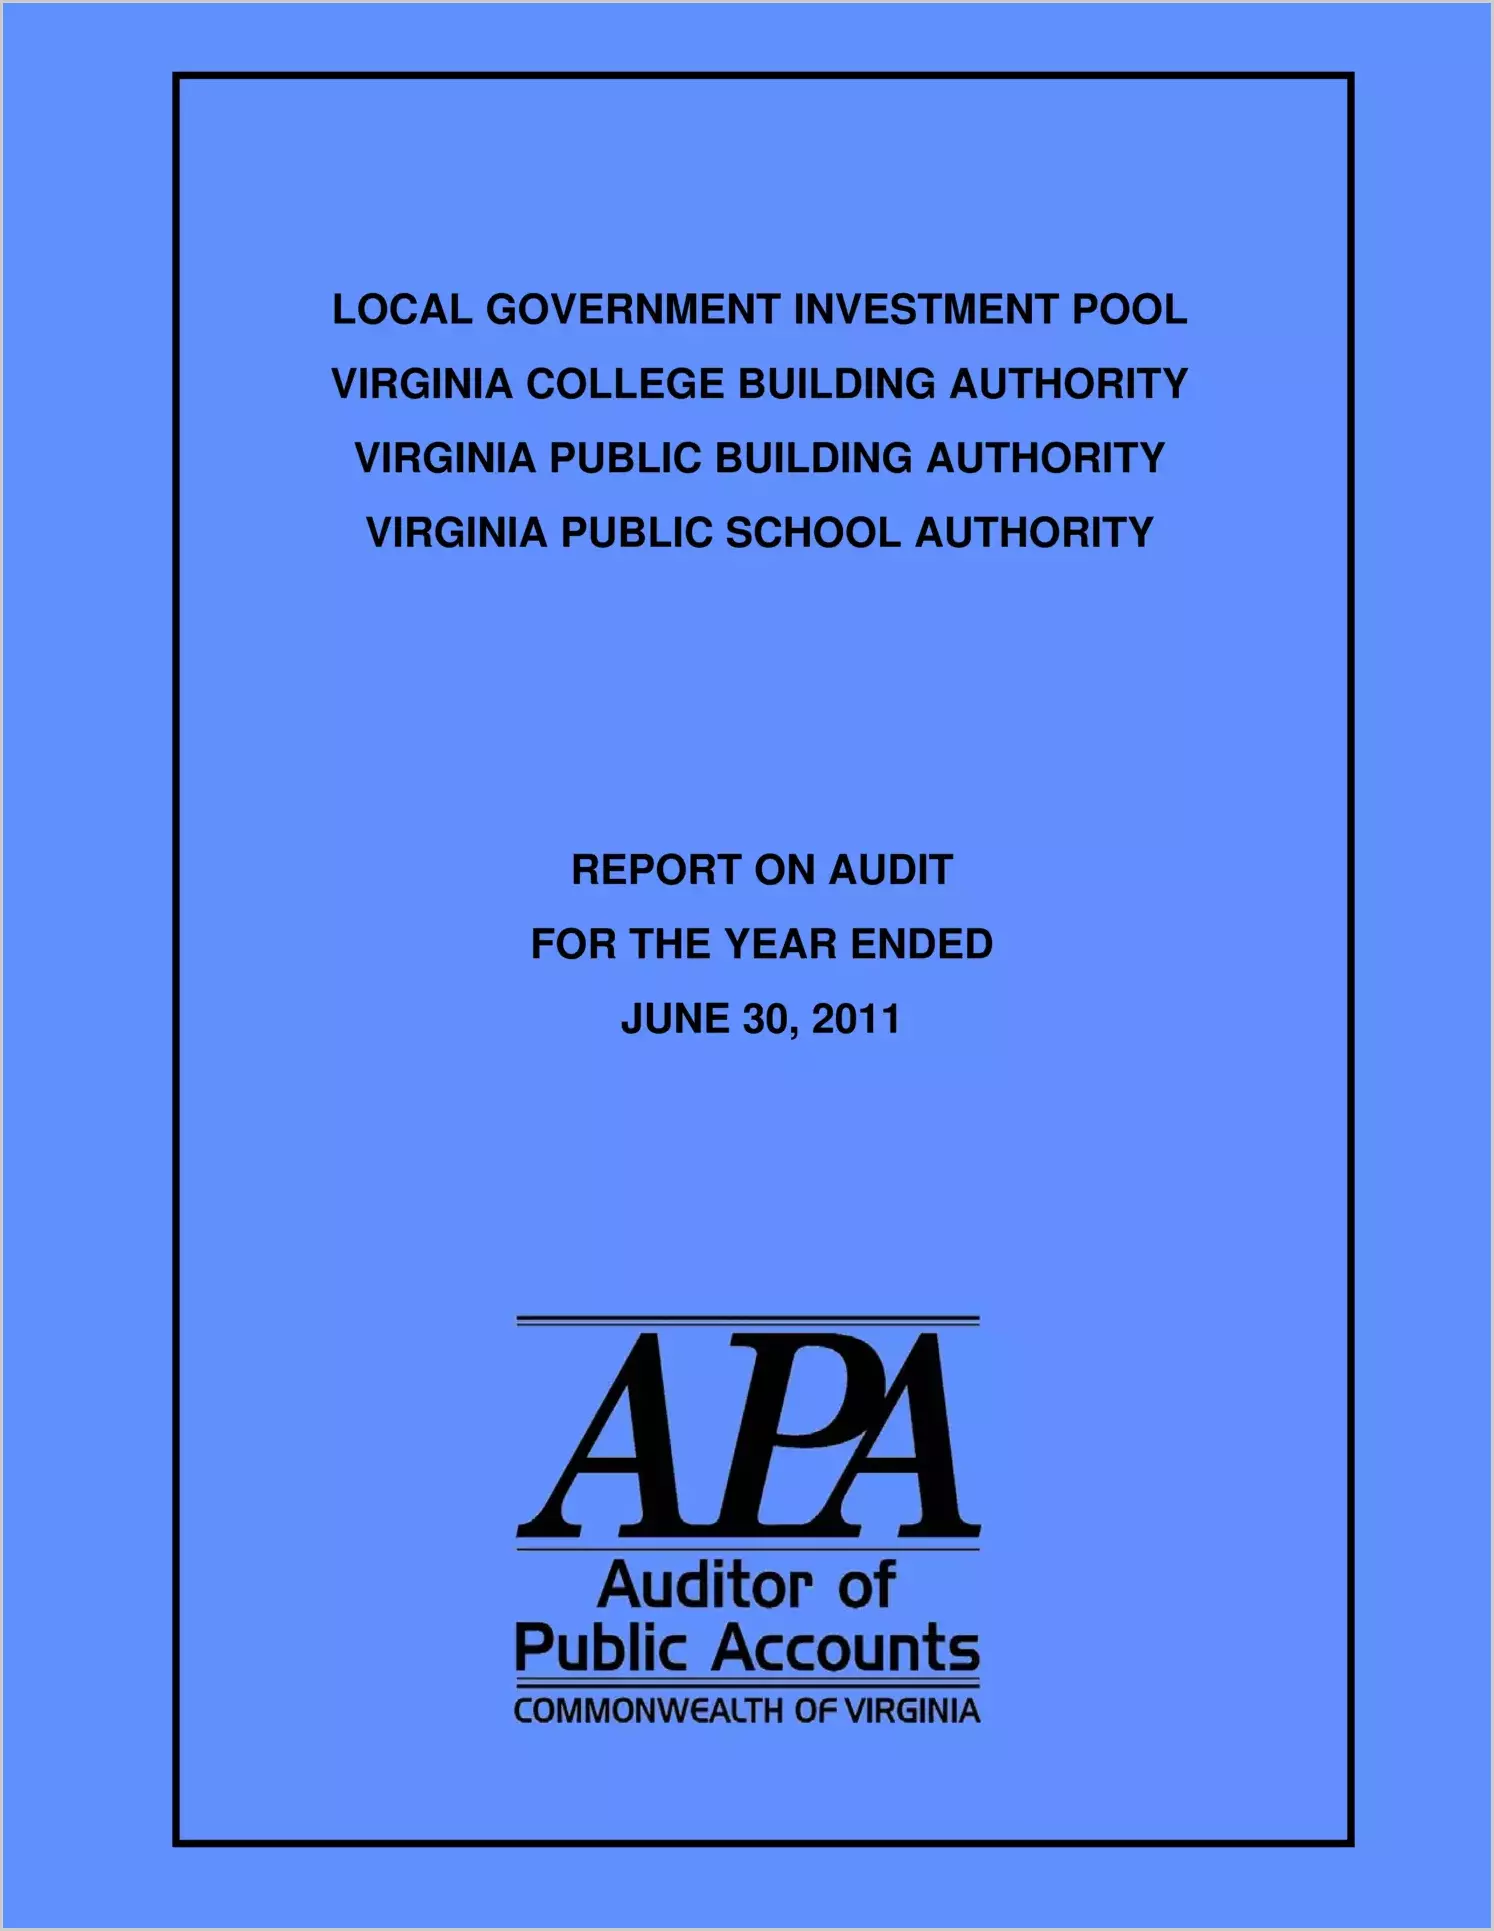 Local Government Investment Pool, Virginia College Building Authority, Virginia Public Building Authority, Virginia Public School Authority Report on Audit for Period Ended June 30, 2010